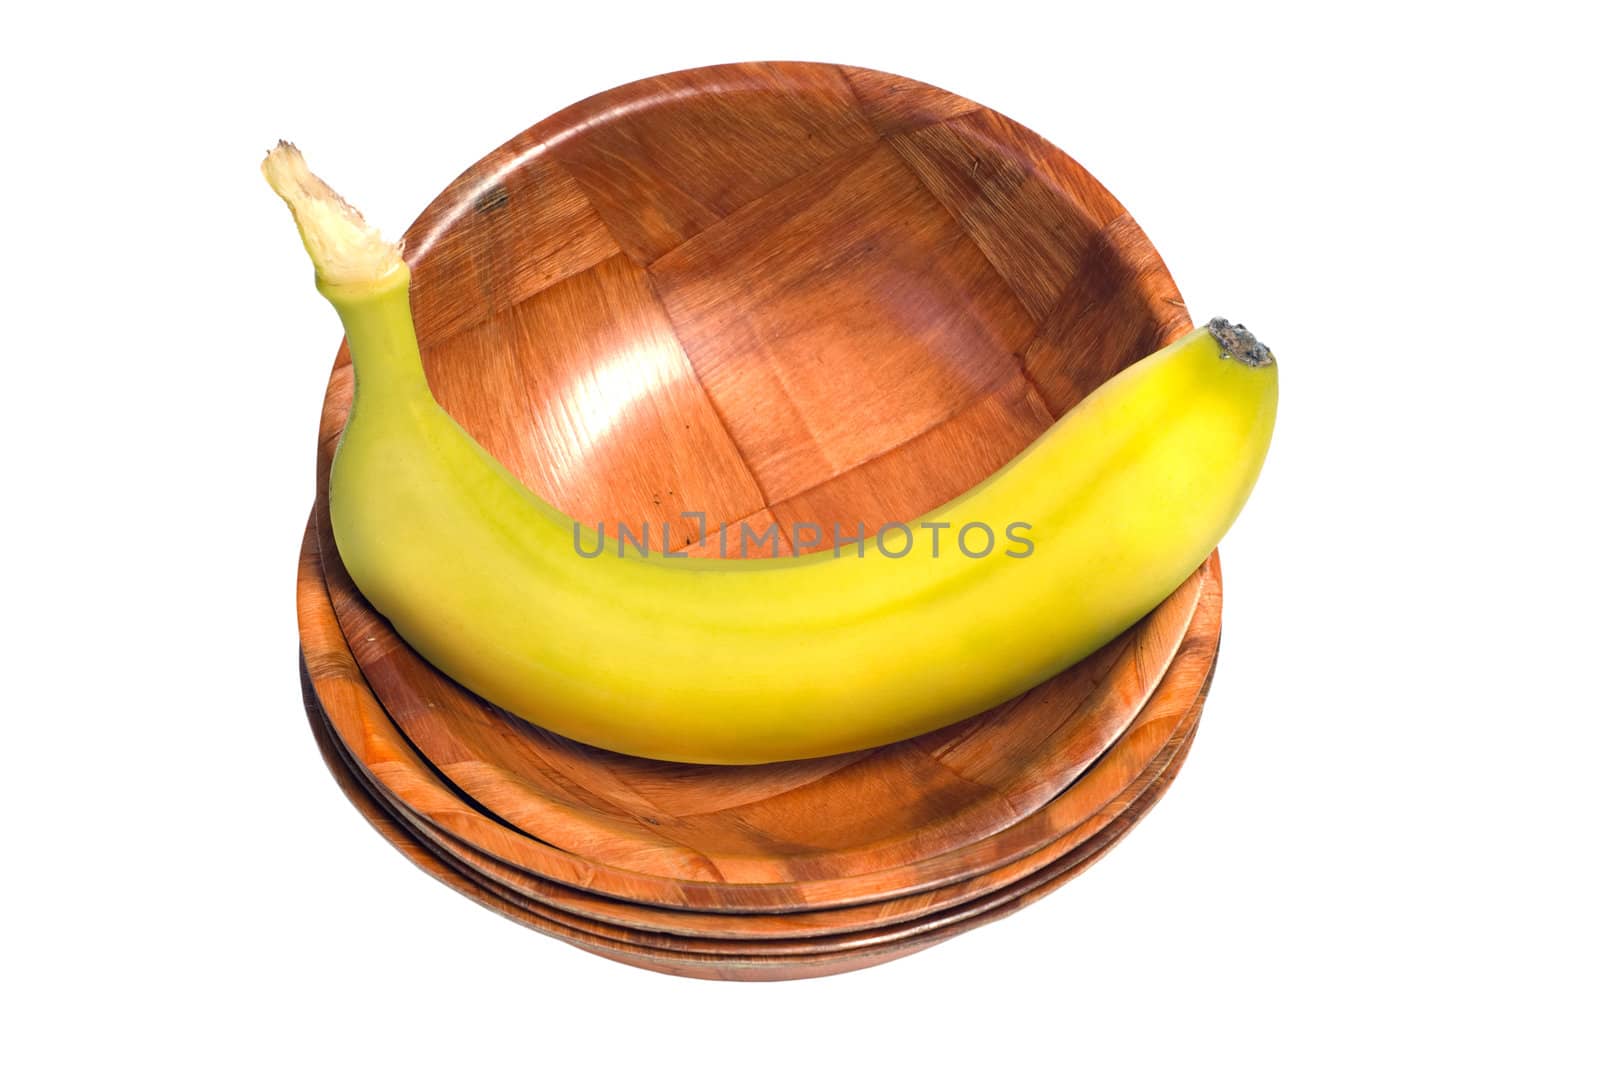 A fresh banana sitting in a wooden bowl, at the top of a stack of bowls, isolated against a white background